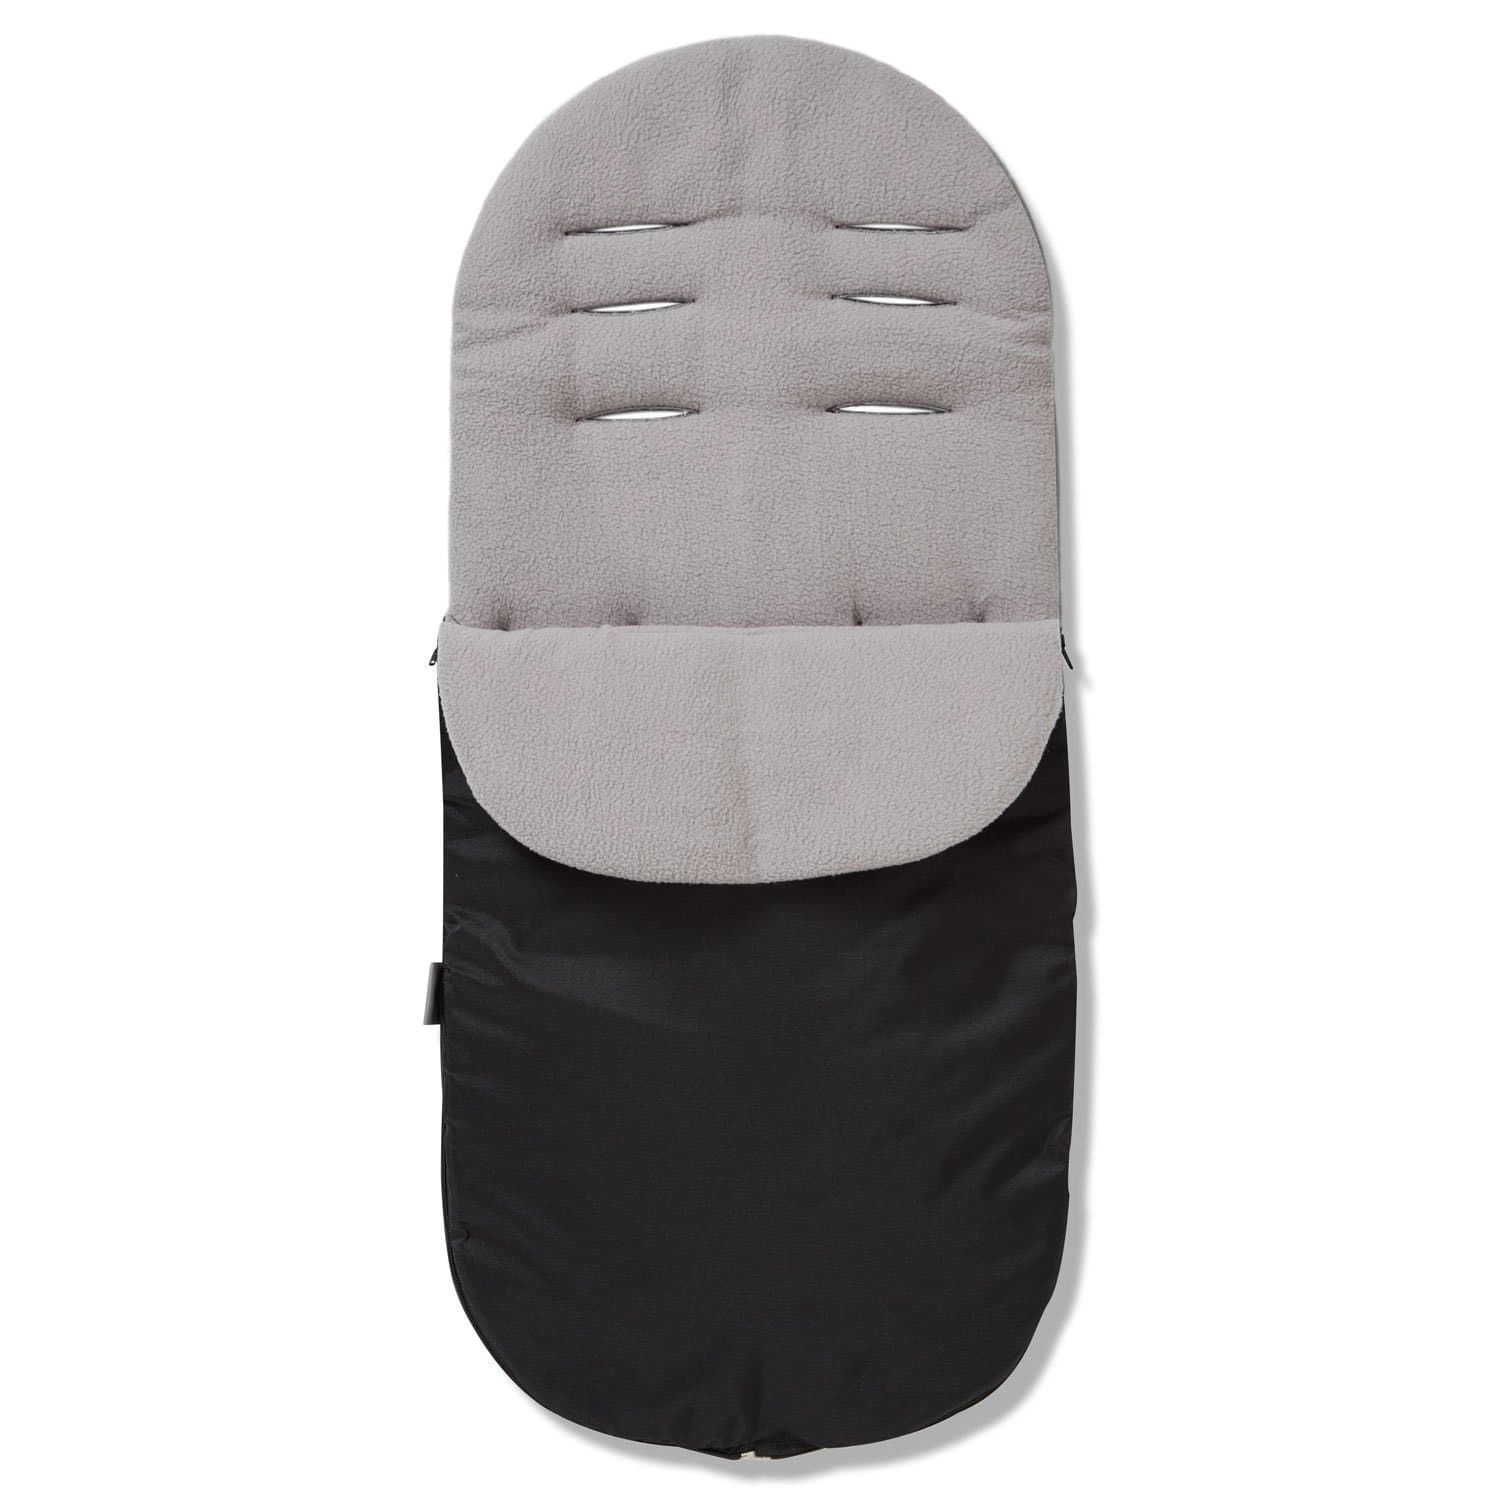 Footmuff / Cosy Toes Compatible with Baby Jogger - Grey / Fits All Models | For Your Little One